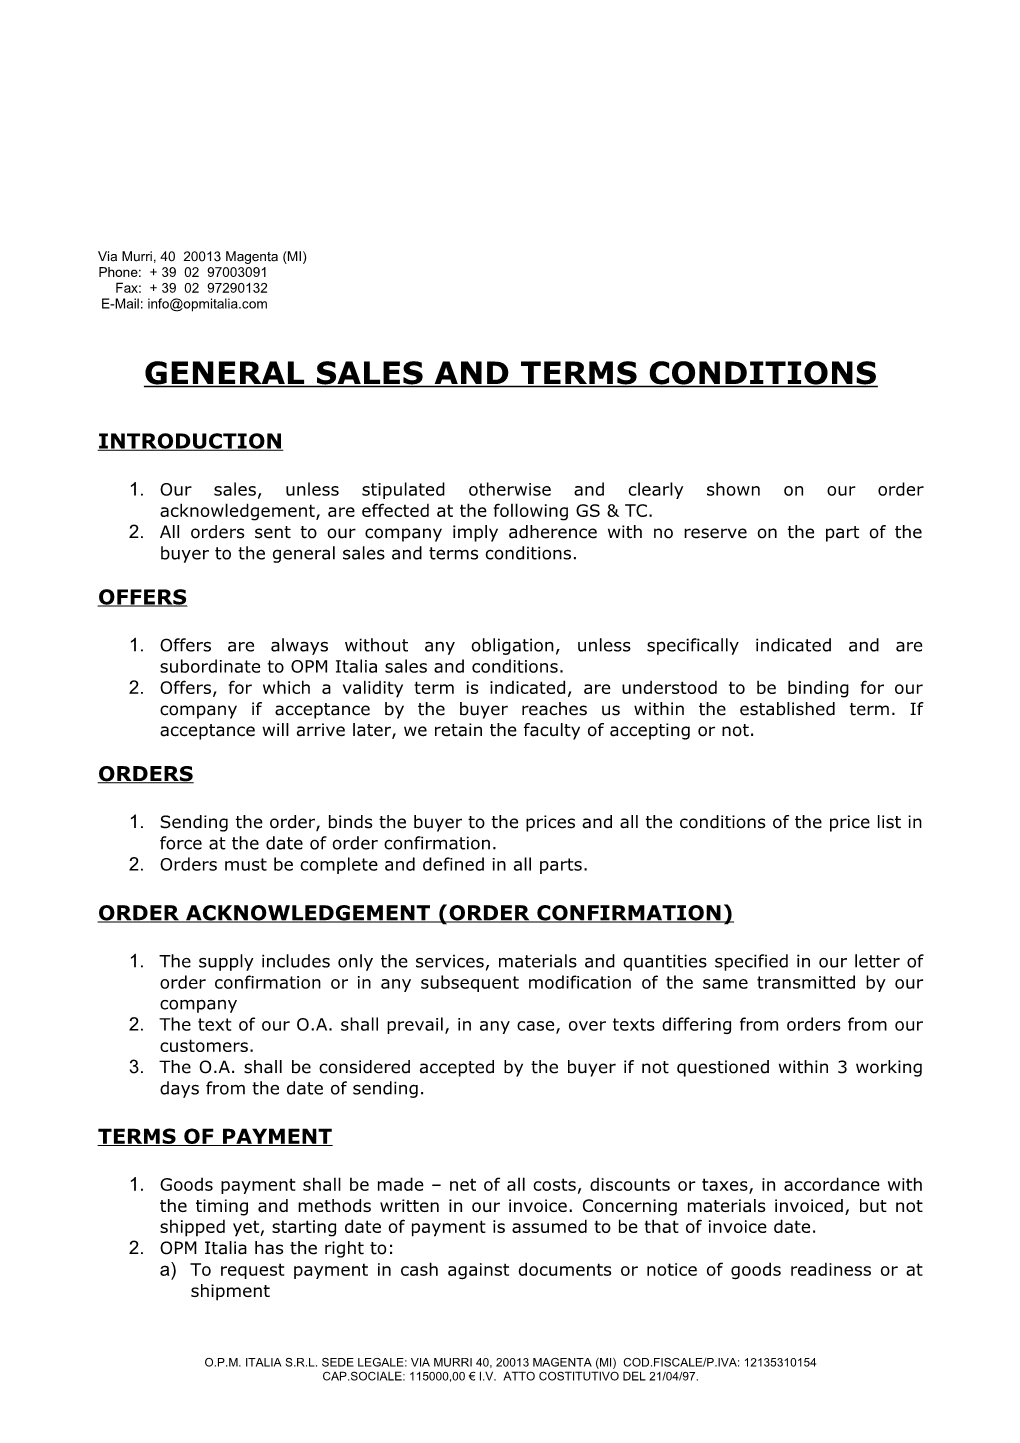 General Sales and Terms Conditions